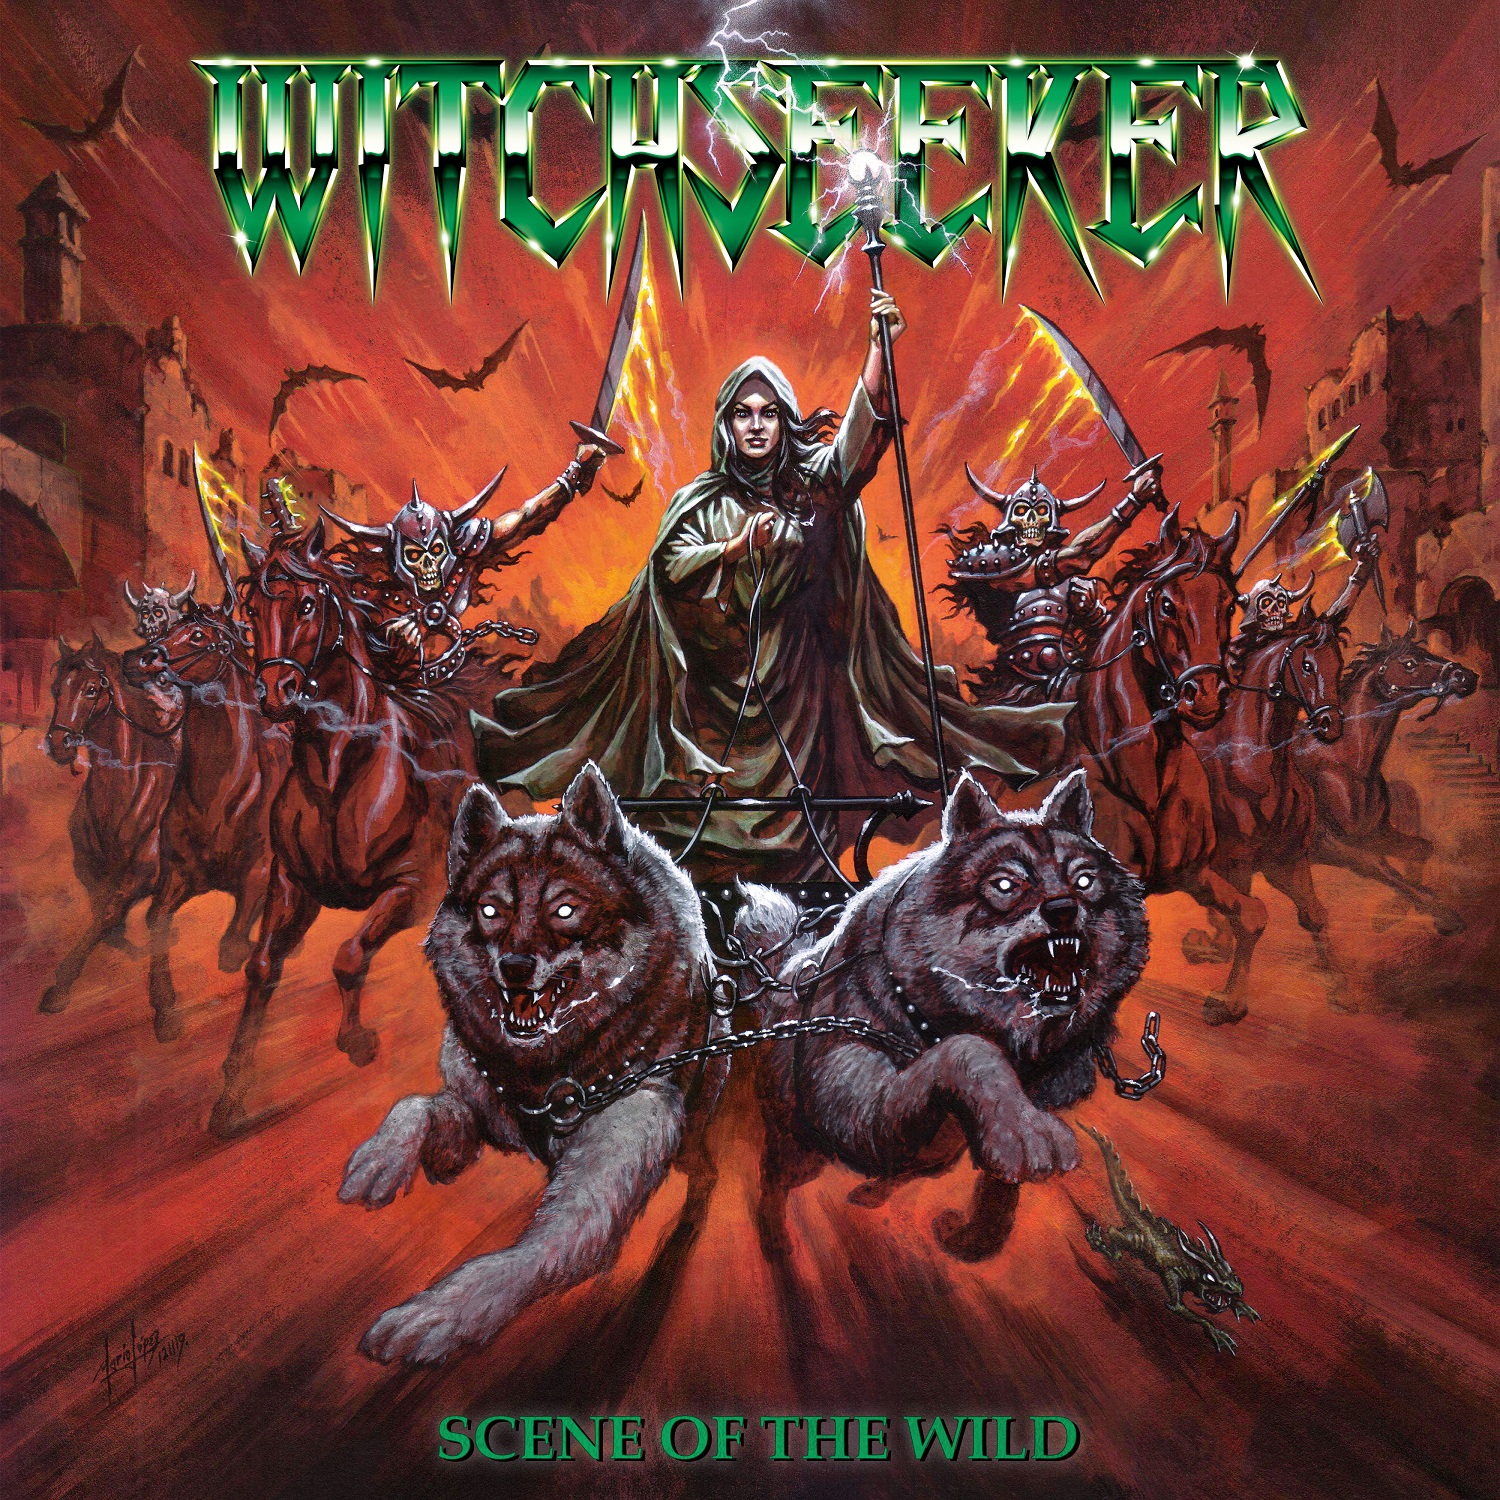 Witchseeker – Scene of the Wild Review